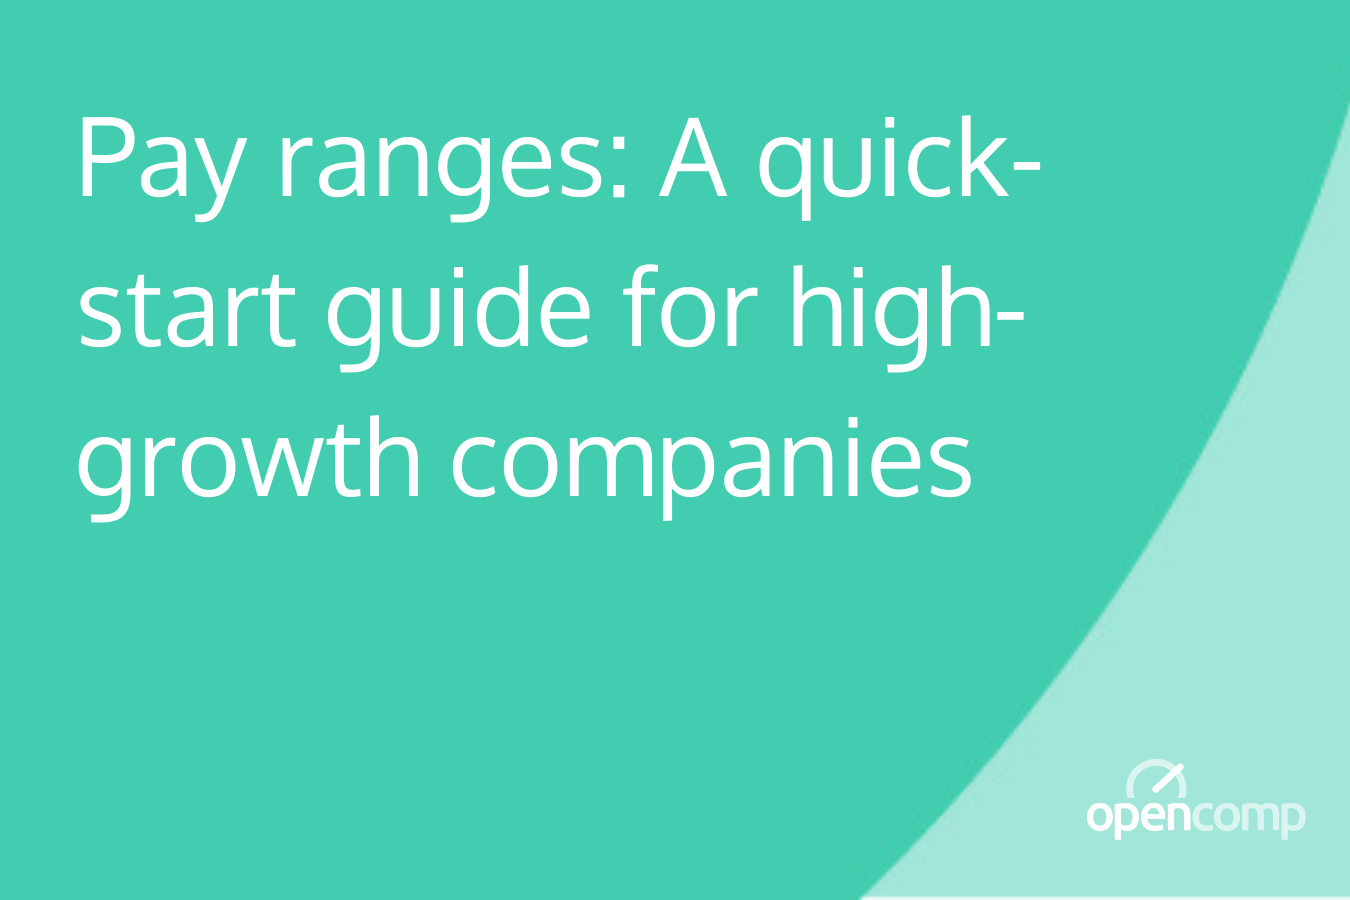 Pay ranges_ A quick-start guide for high-growth companies